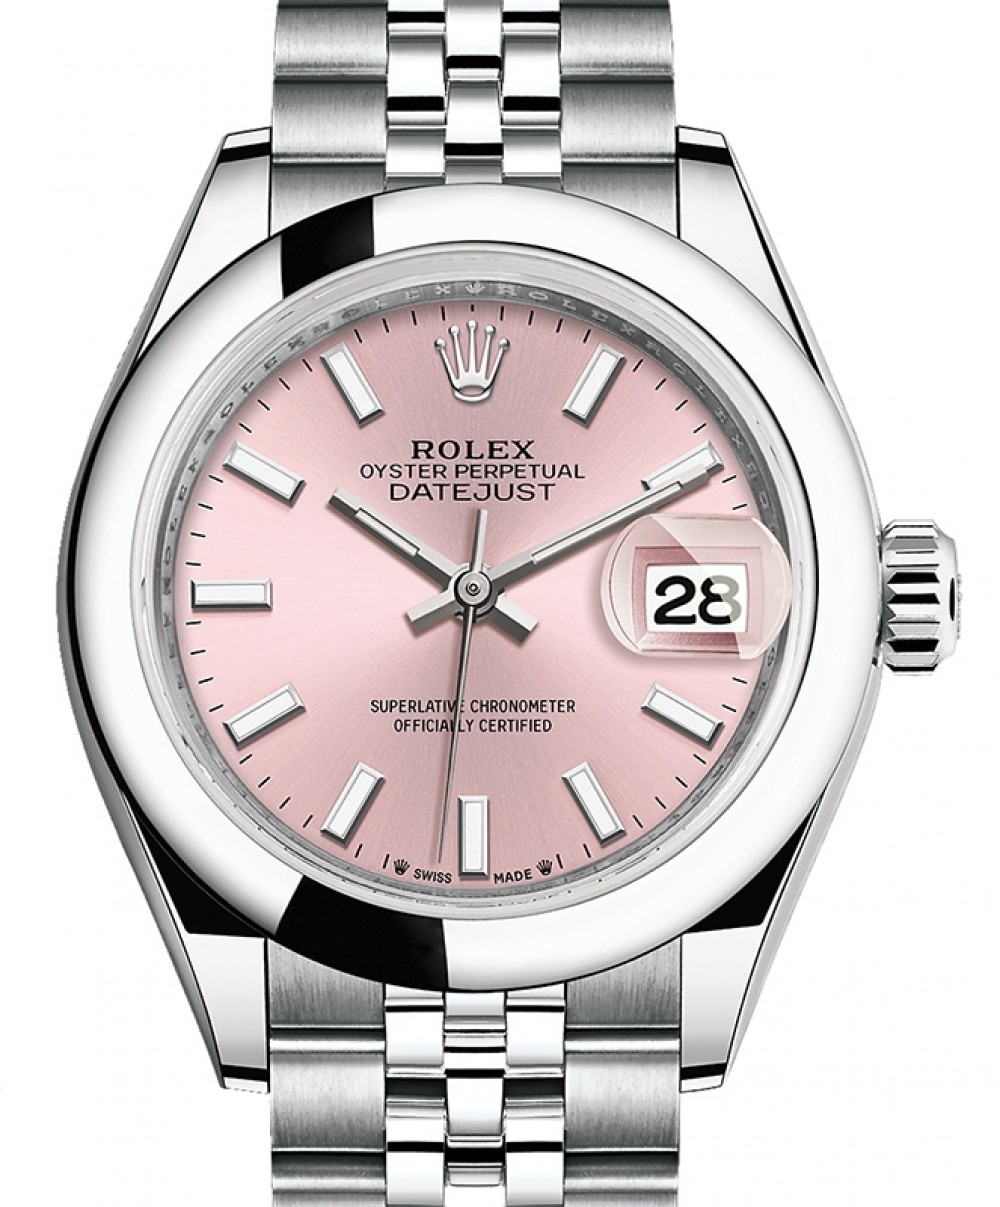 Rolex Lady-Datejust 28 279160 Pink Index Domed Stainless Steel Jubilee 28mm  Automatic - BRAND NEW